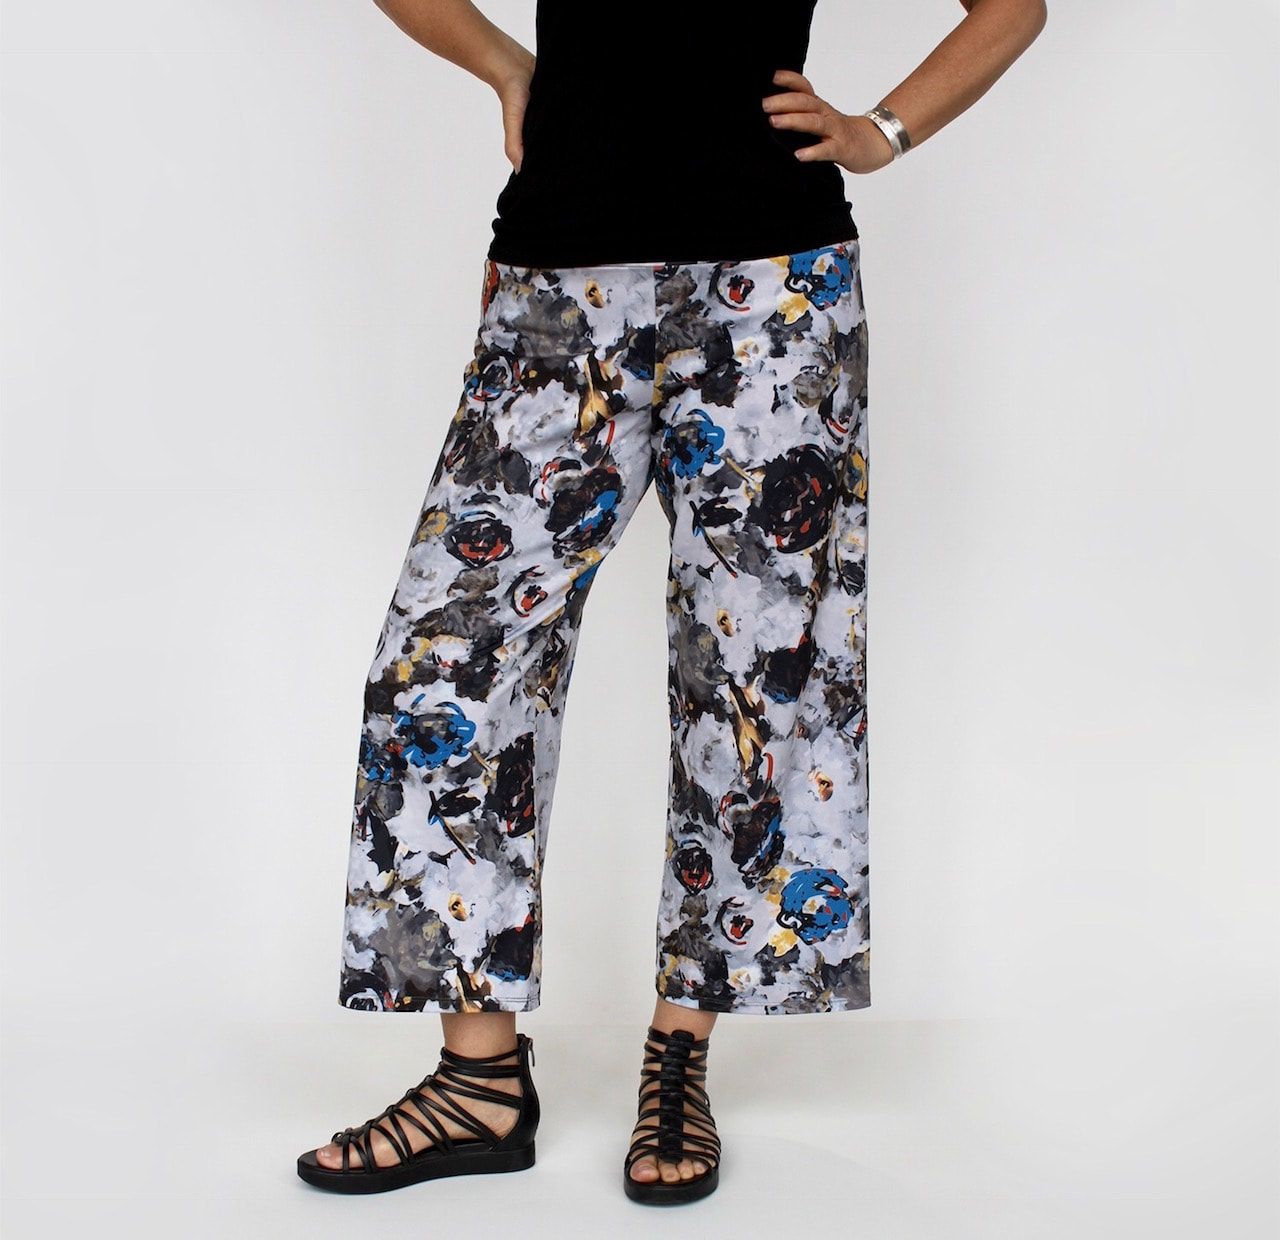 Women's wide leg capri pant in abstract floral print stretch knit active  wear fabric